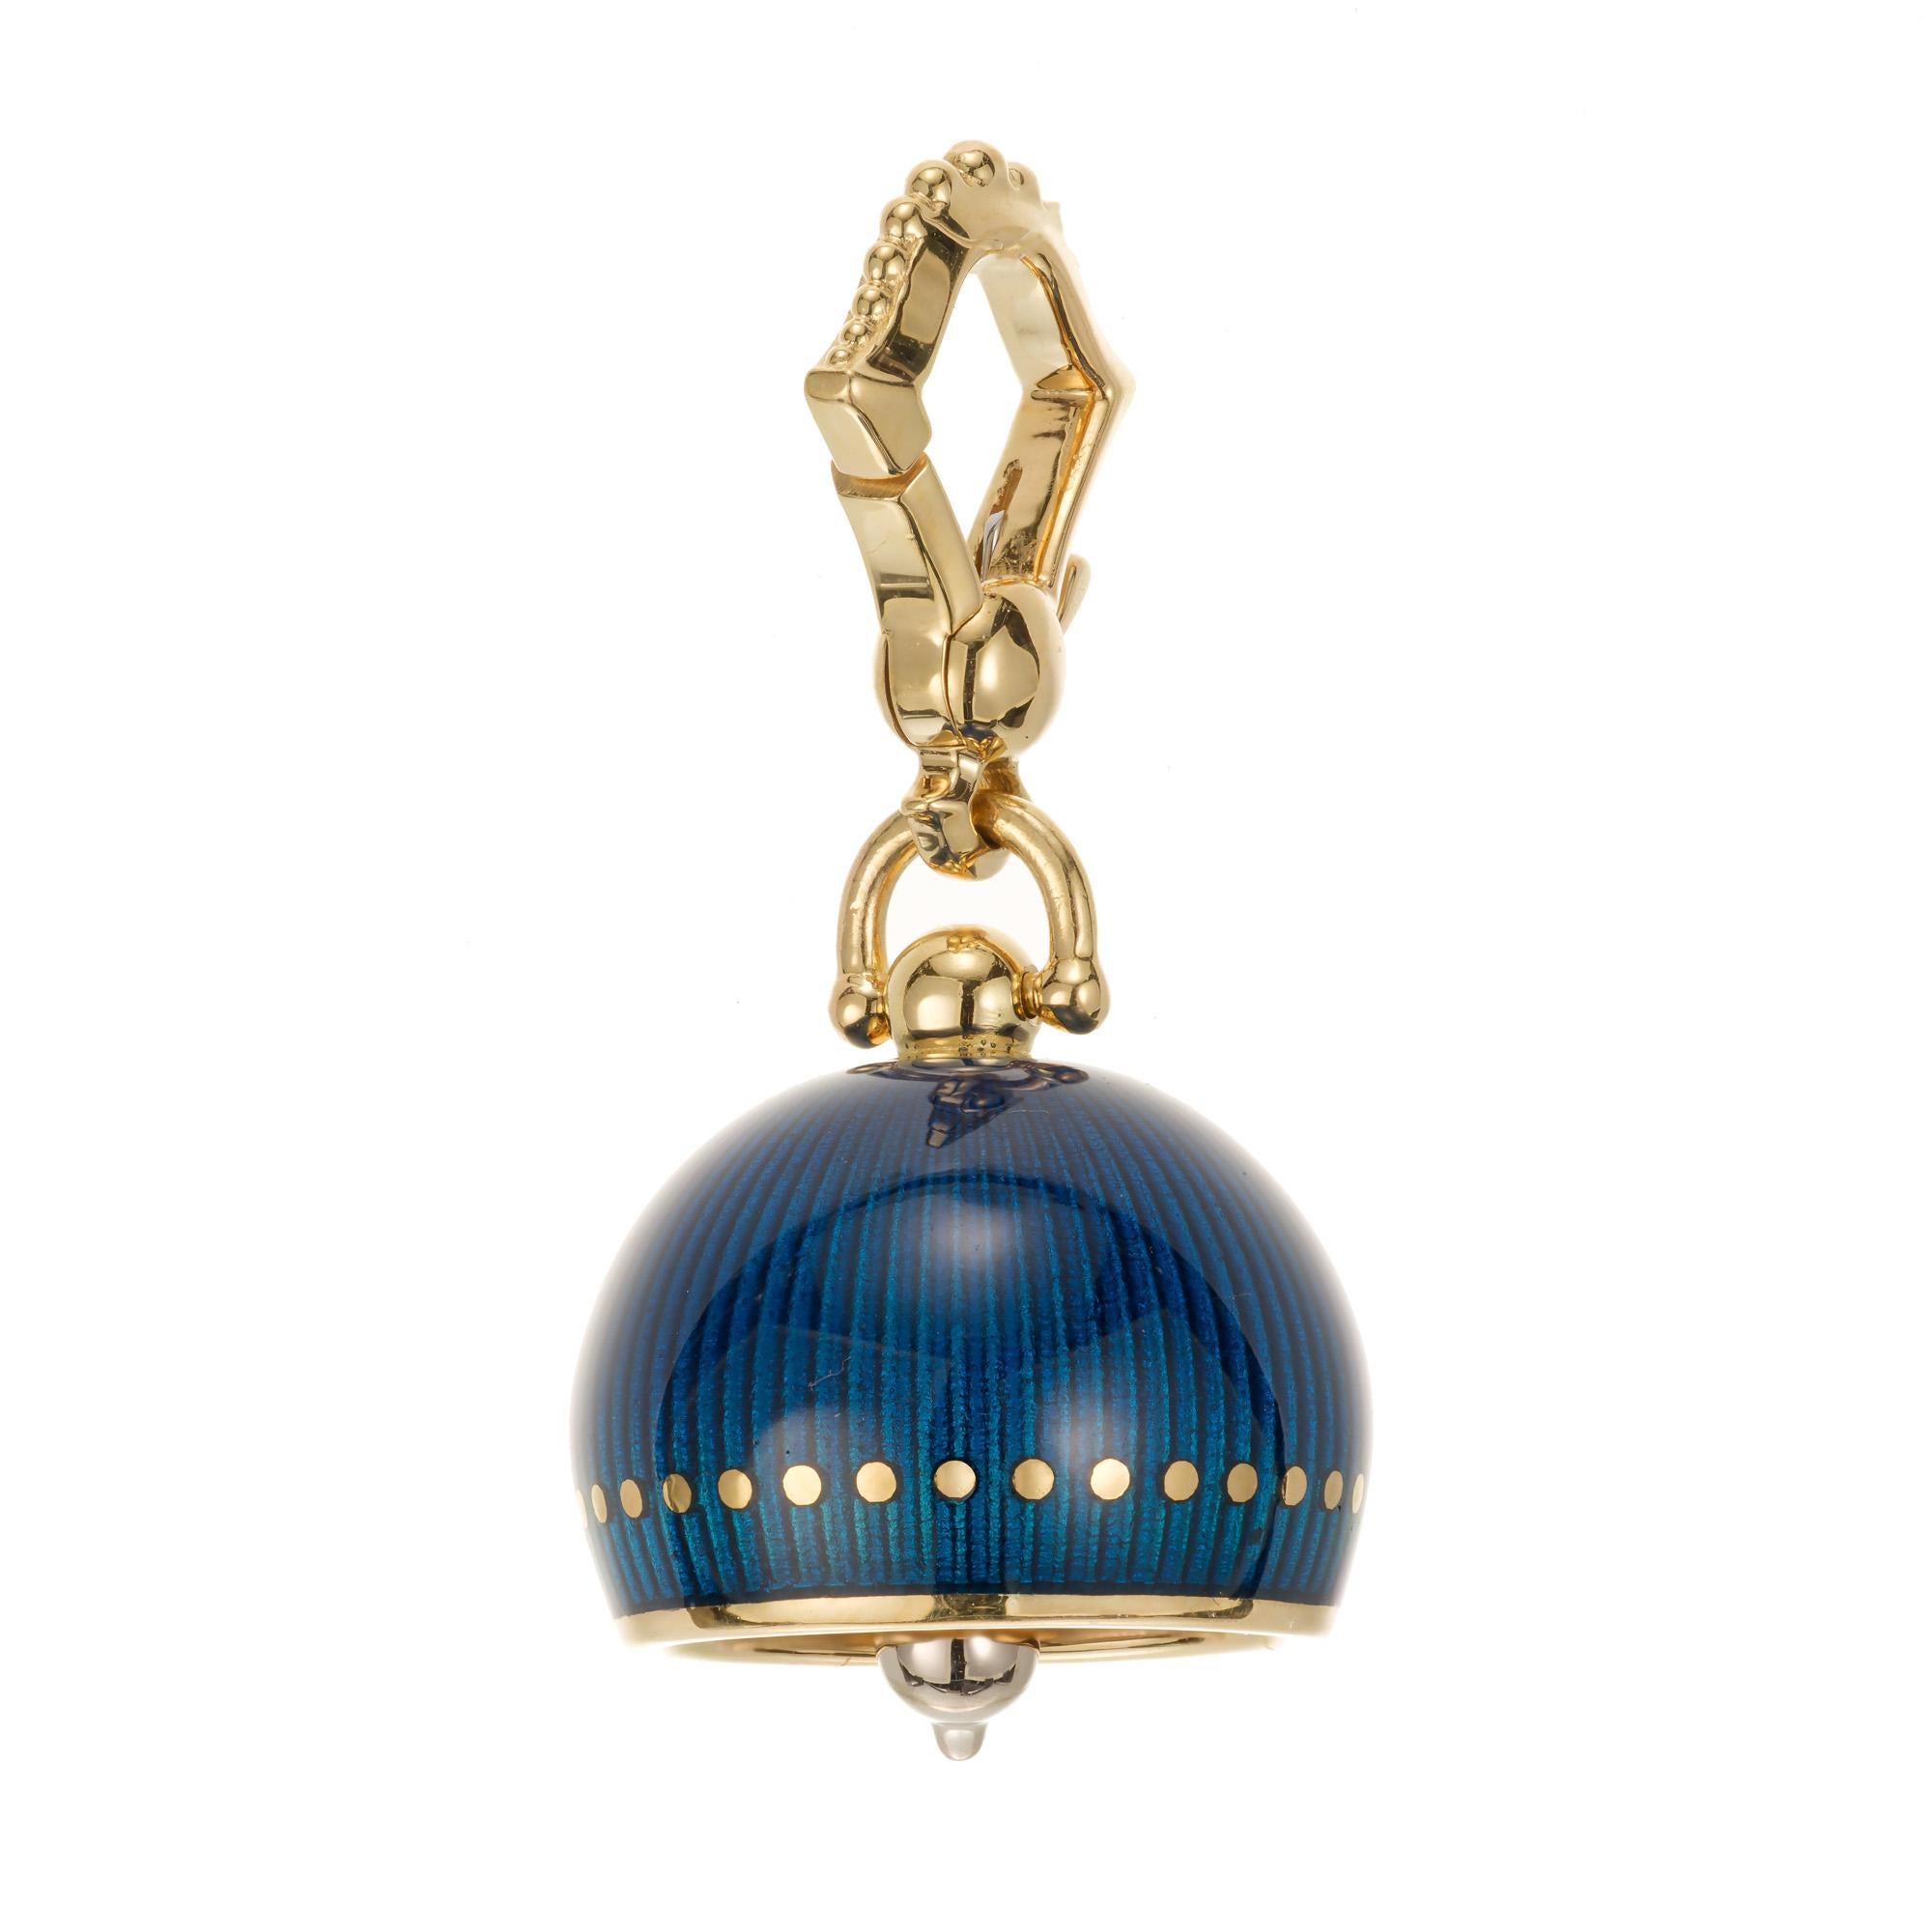 Paul Morelli 14mm enameled meditation bell in 18k yellow gold with teal enamel and an orante lobster clasp. The clapper is 18k white gold and functional.

18k yellow gold 
18k white gold 
Stamped: 750
Hallmark: Morelli 
7.0 grams
Top to bottom: